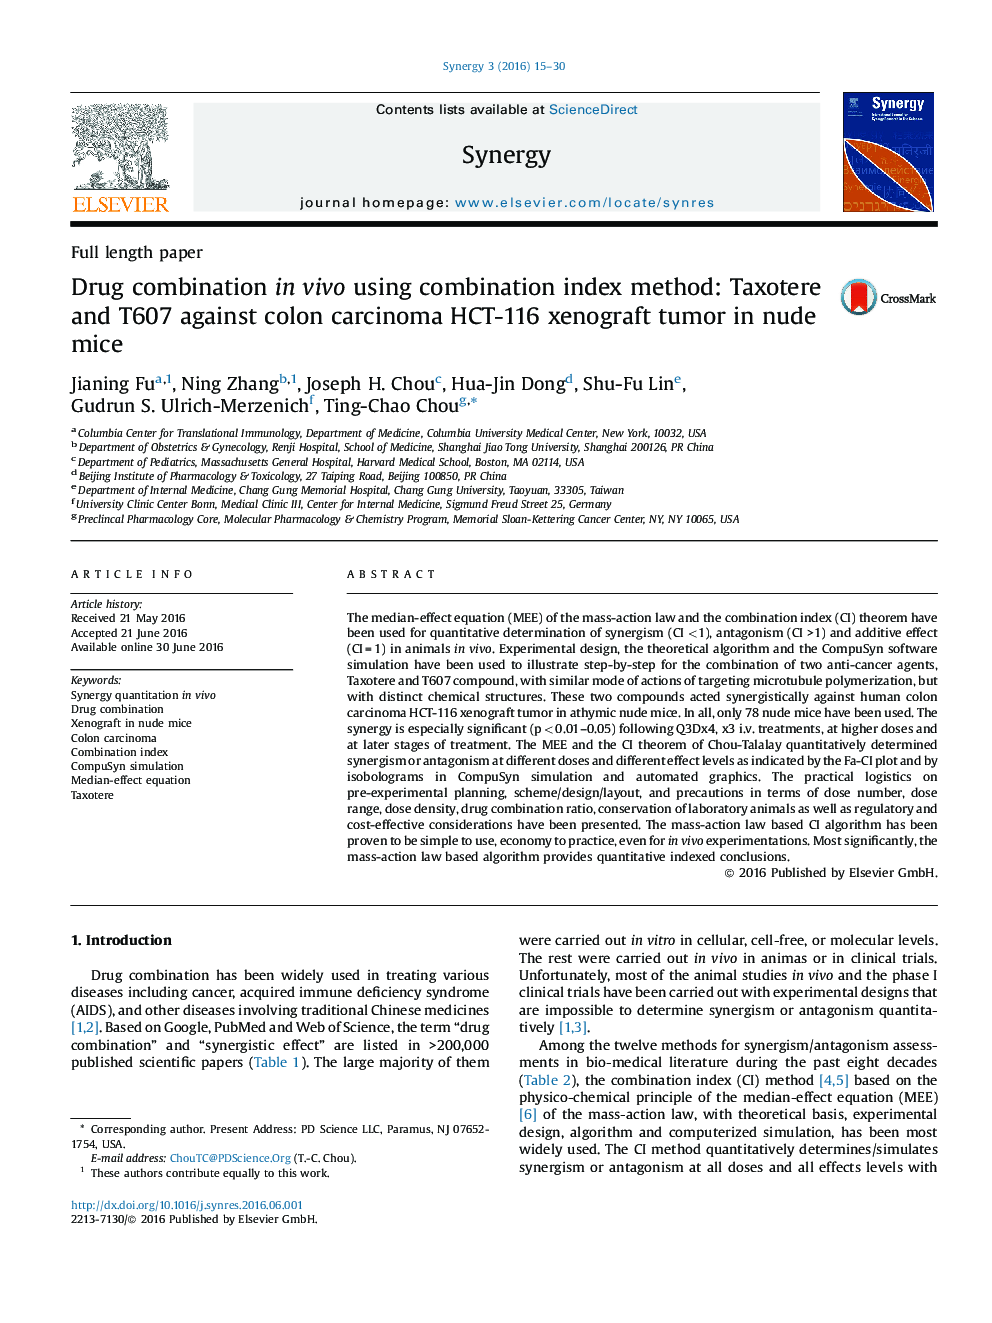 Drug combination in vivo using combination index method: Taxotere and T607 against colon carcinoma HCT-116 xenograft tumor in nude mice